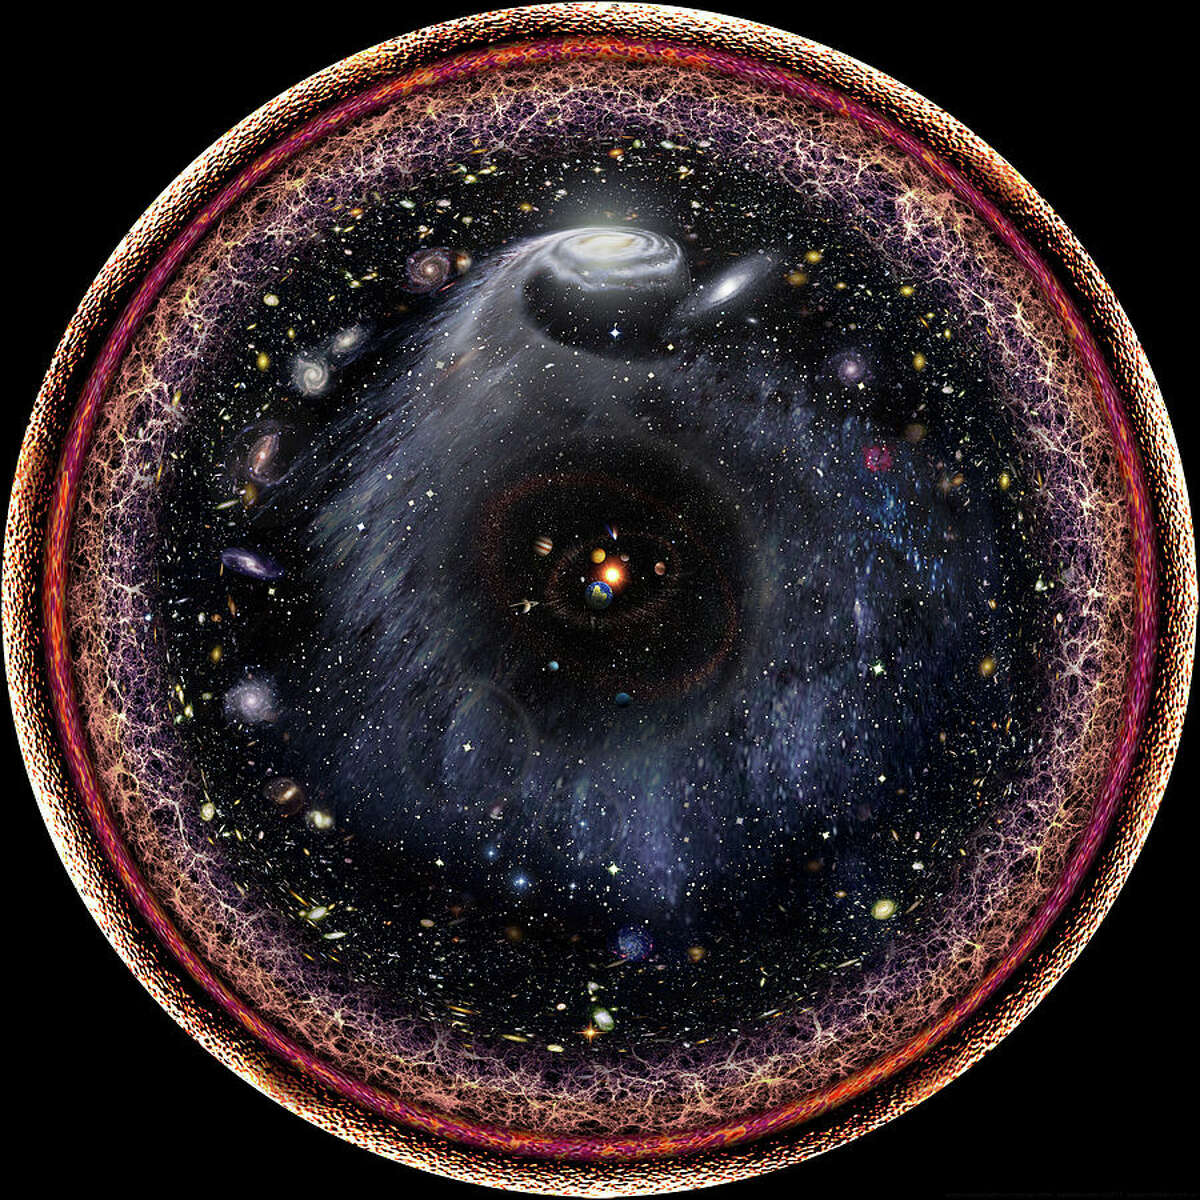 Artist's logarithmic scale conception of the observable universe with the Solar System at the center, inner and outer planets, Kuiper belt, Oort cloud, Alpha Centauri, Perseus Arm, Milky Way galaxy, Andromeda galaxy, nearby galaxies, Cosmic Web, Cosmic microwave radiation and the Big Bang on the edge.(Pablo Carlos Budassi / Wikimedia Commons)